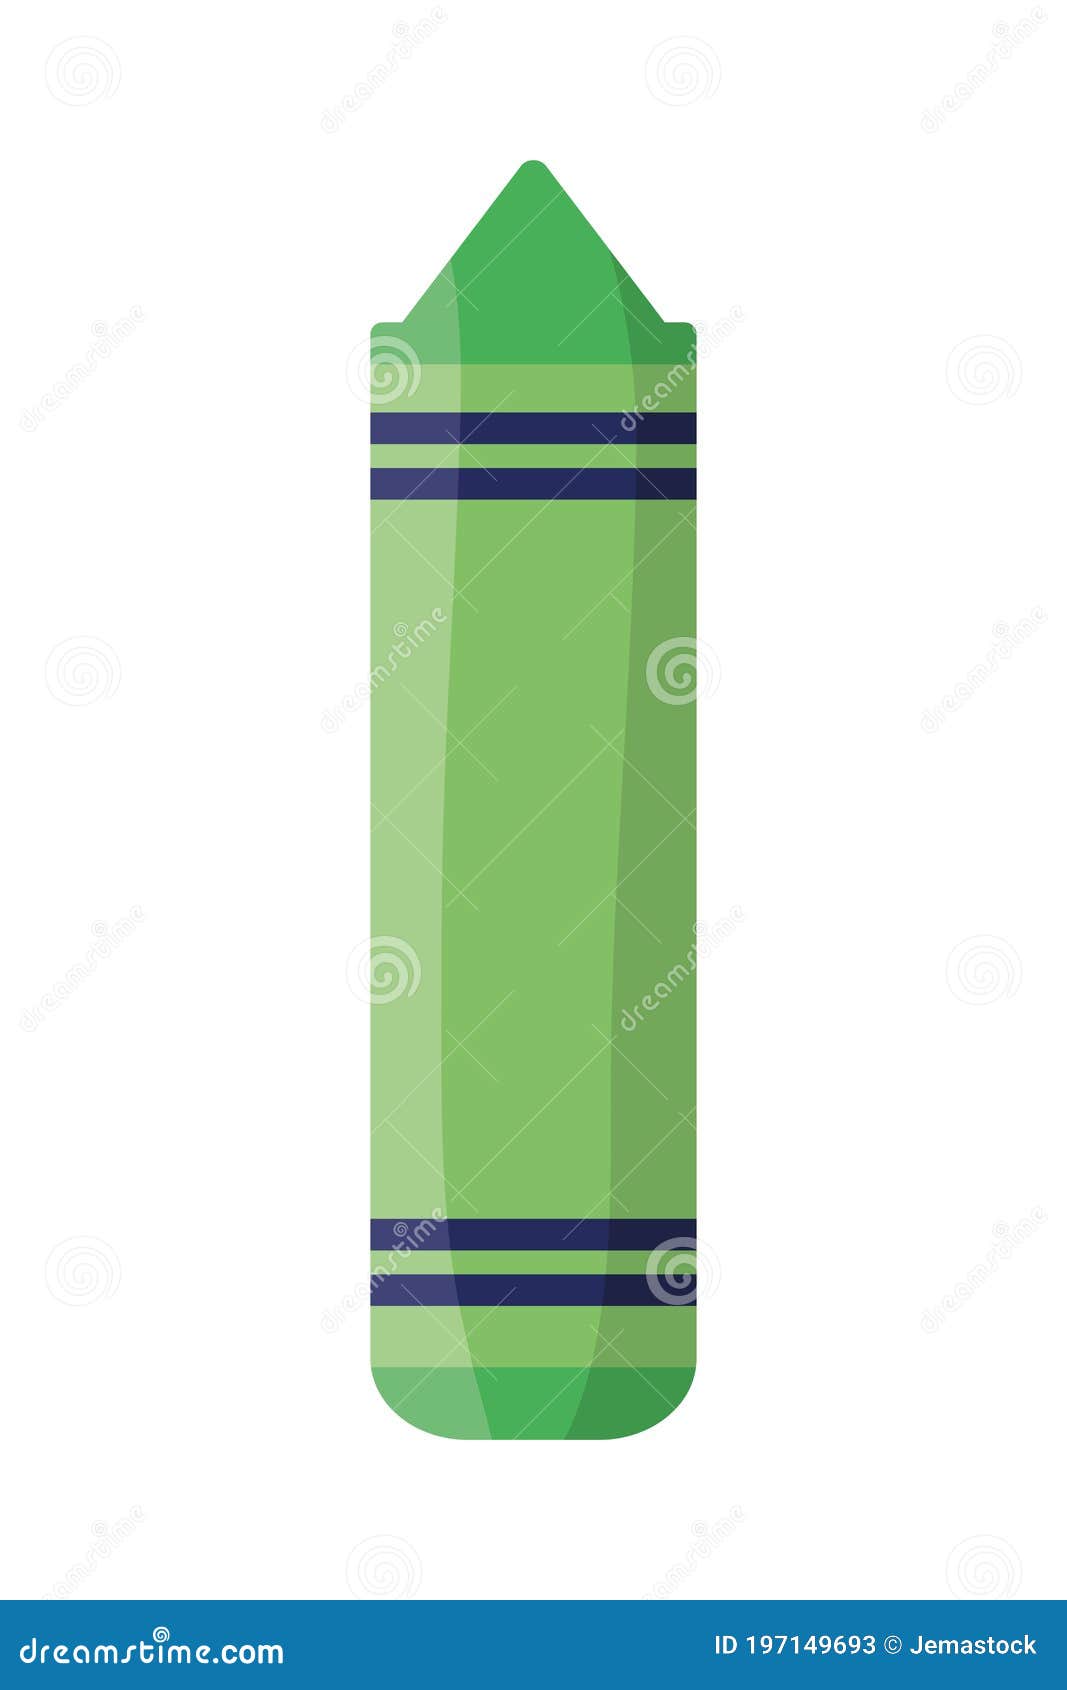 Green Crayon Clipart: Crayon Text  Clip art, Drawing clipart, How to draw  hands